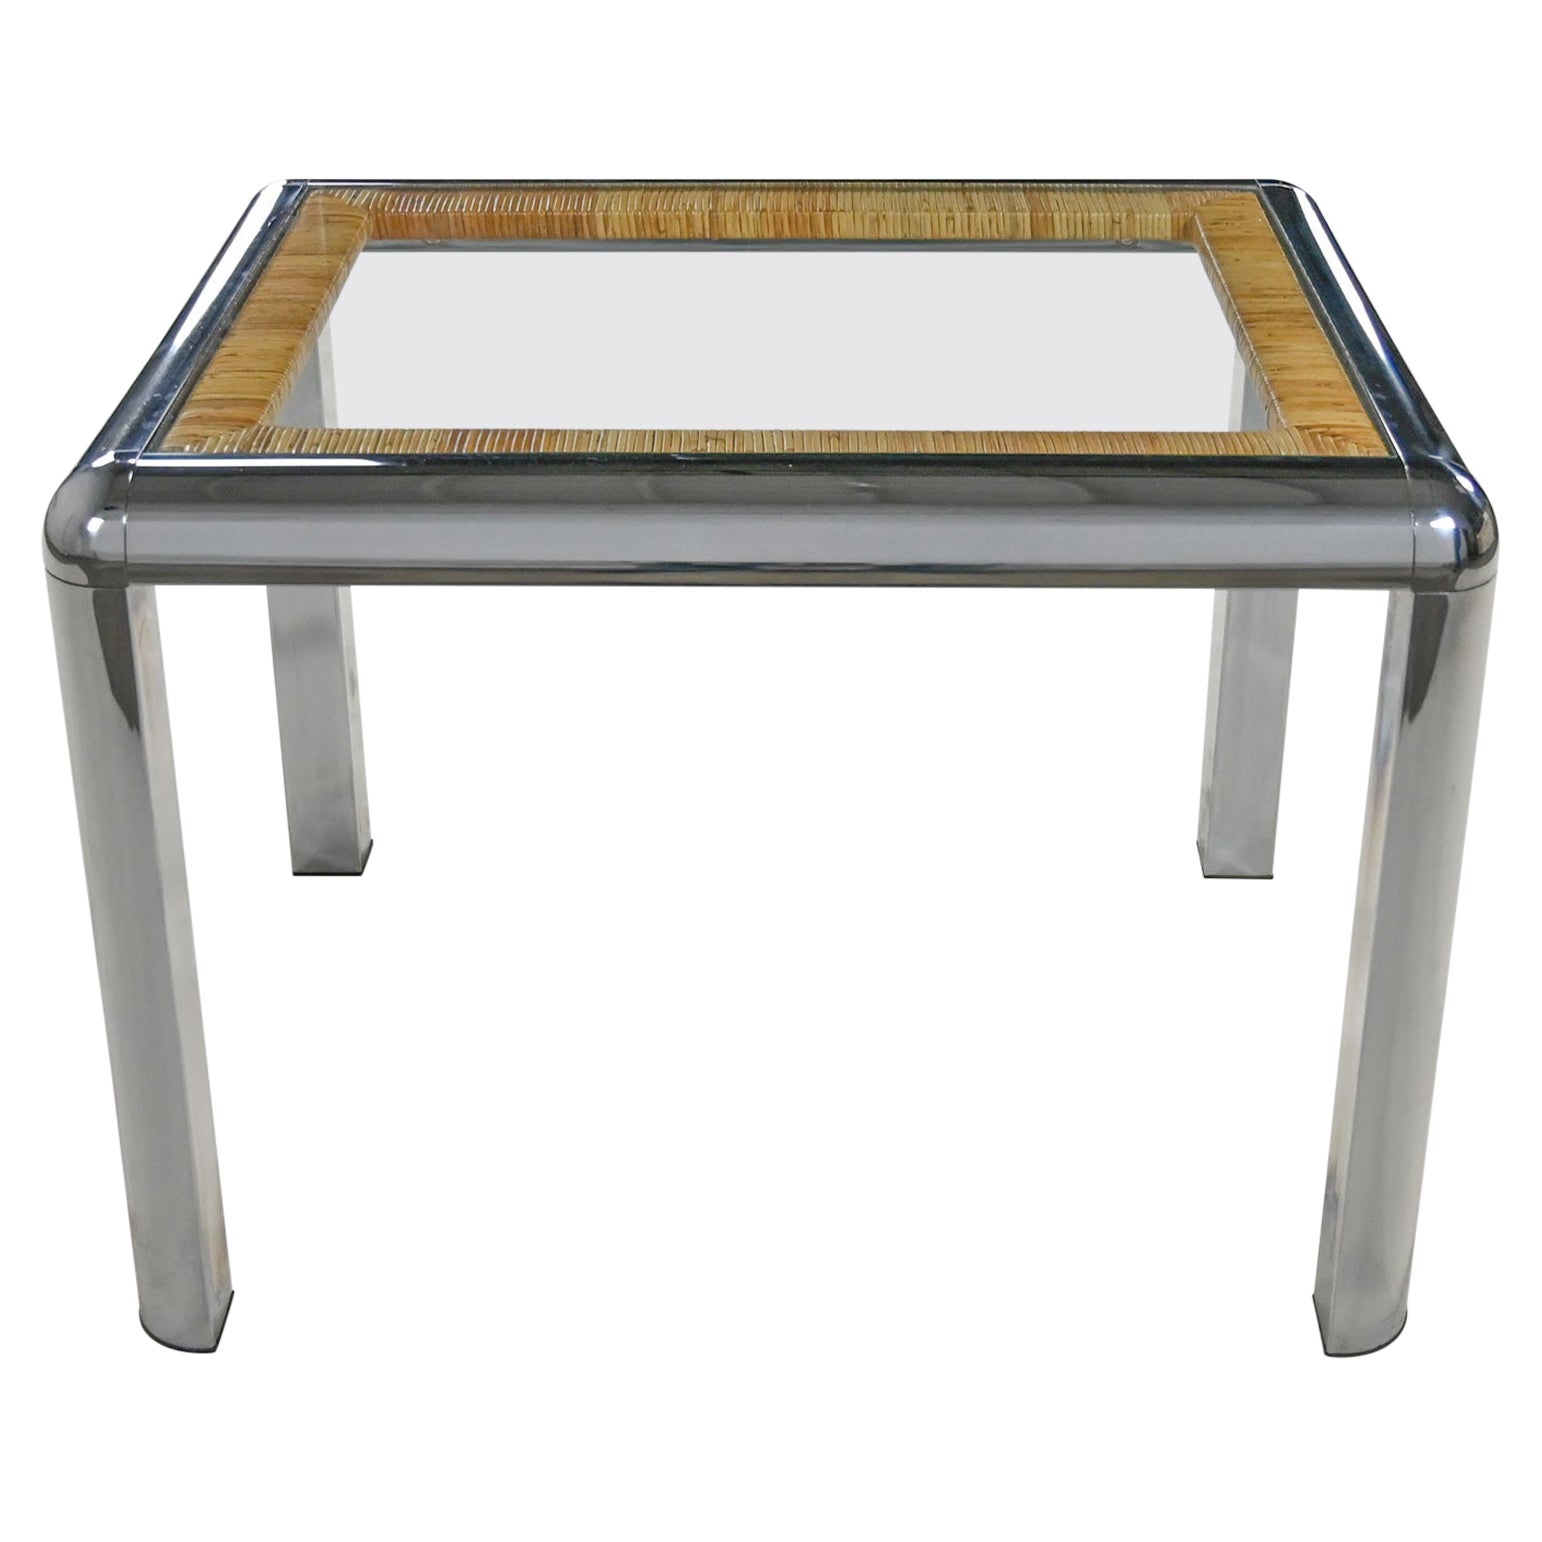 Vintage Modern Rectangular Chrome Glass & Wrapped Rattan Side Table Attr to DIA For Sale